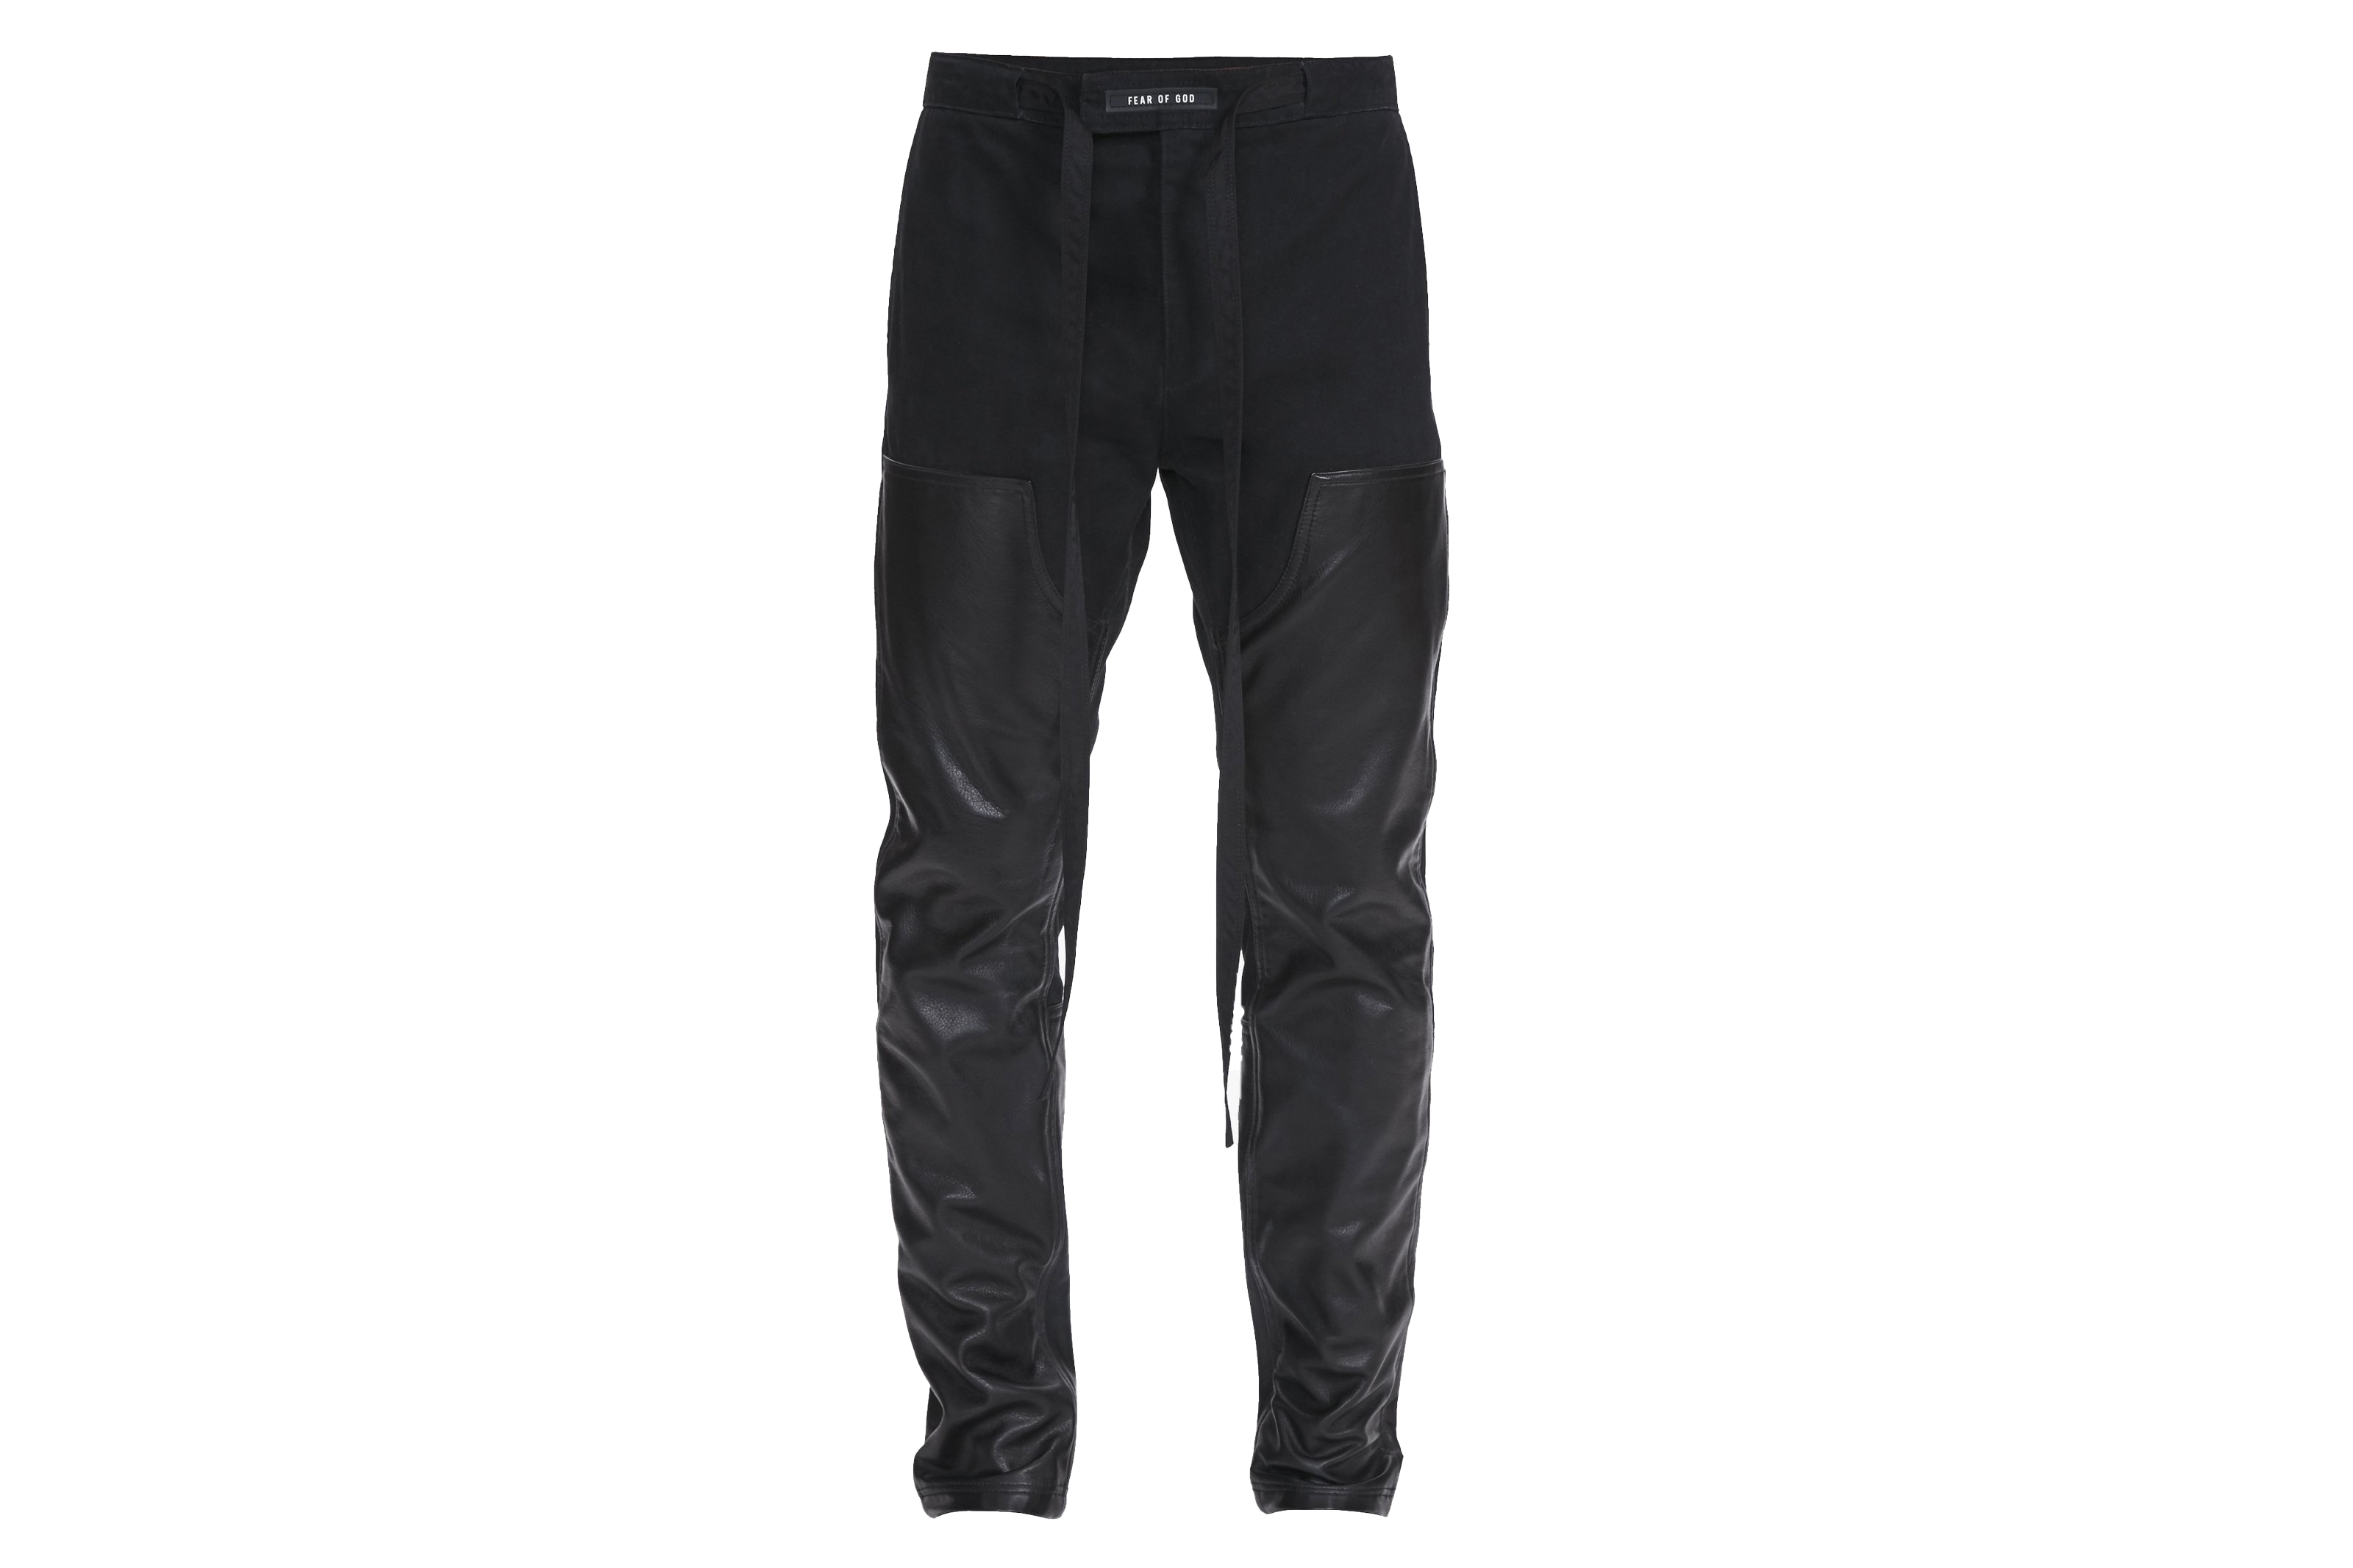 STEEL RUGGED FLEX RELAXED FIT DOUBLEFRONT UTILITY WORK PANT  Carhartt